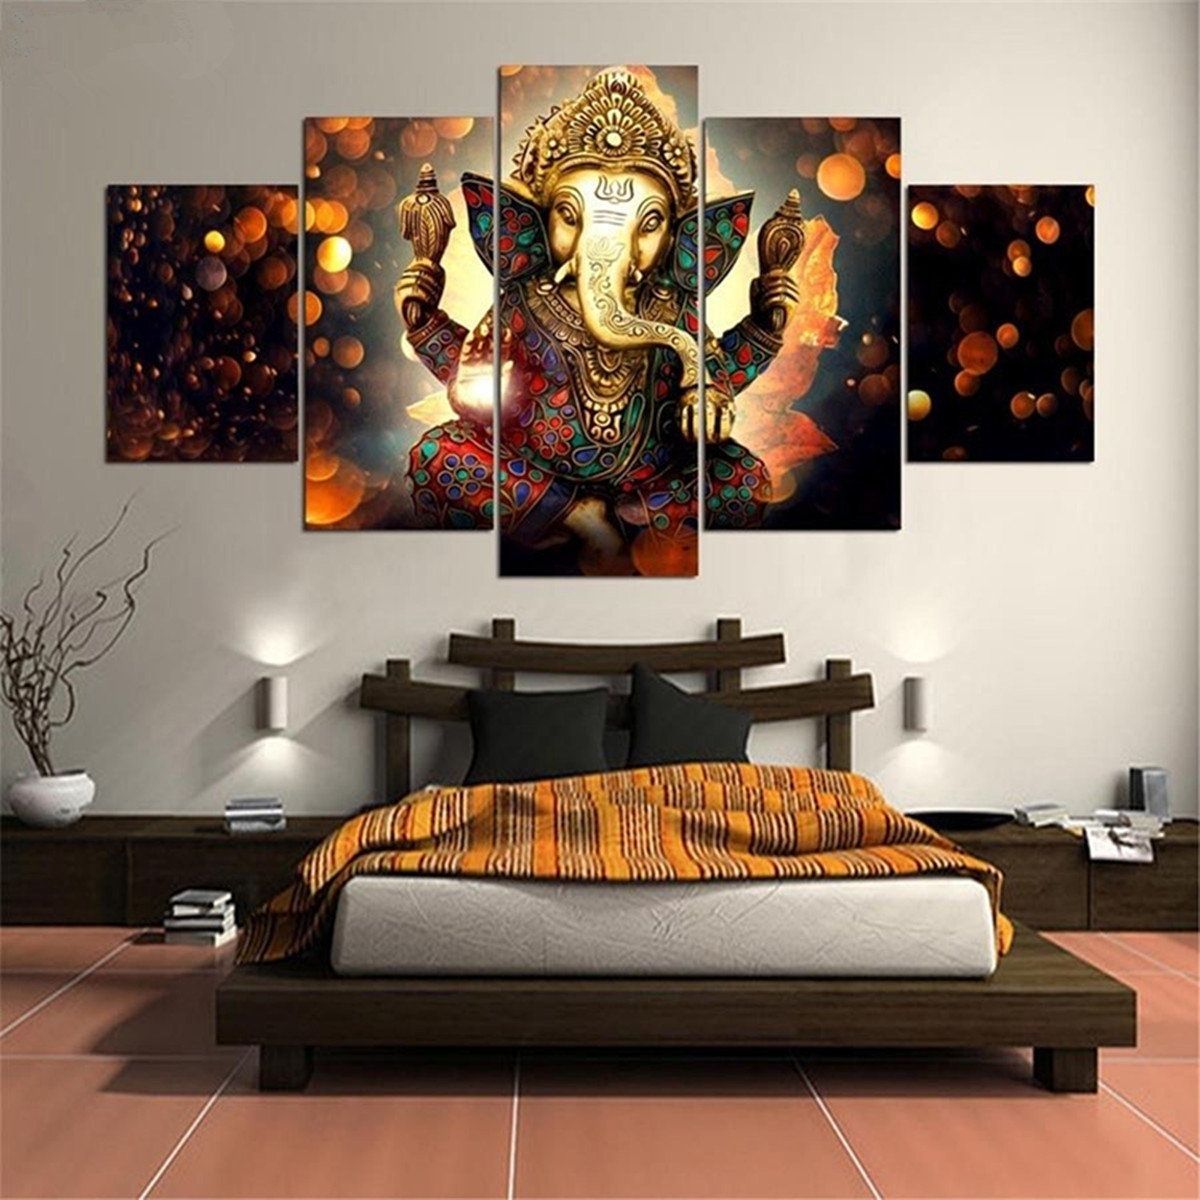 5pcs Ganesha Painting Abstract Print Modern Canvas Wall Art Poster With Regard To Latest Abstract Wall Art Posters (View 8 of 20)